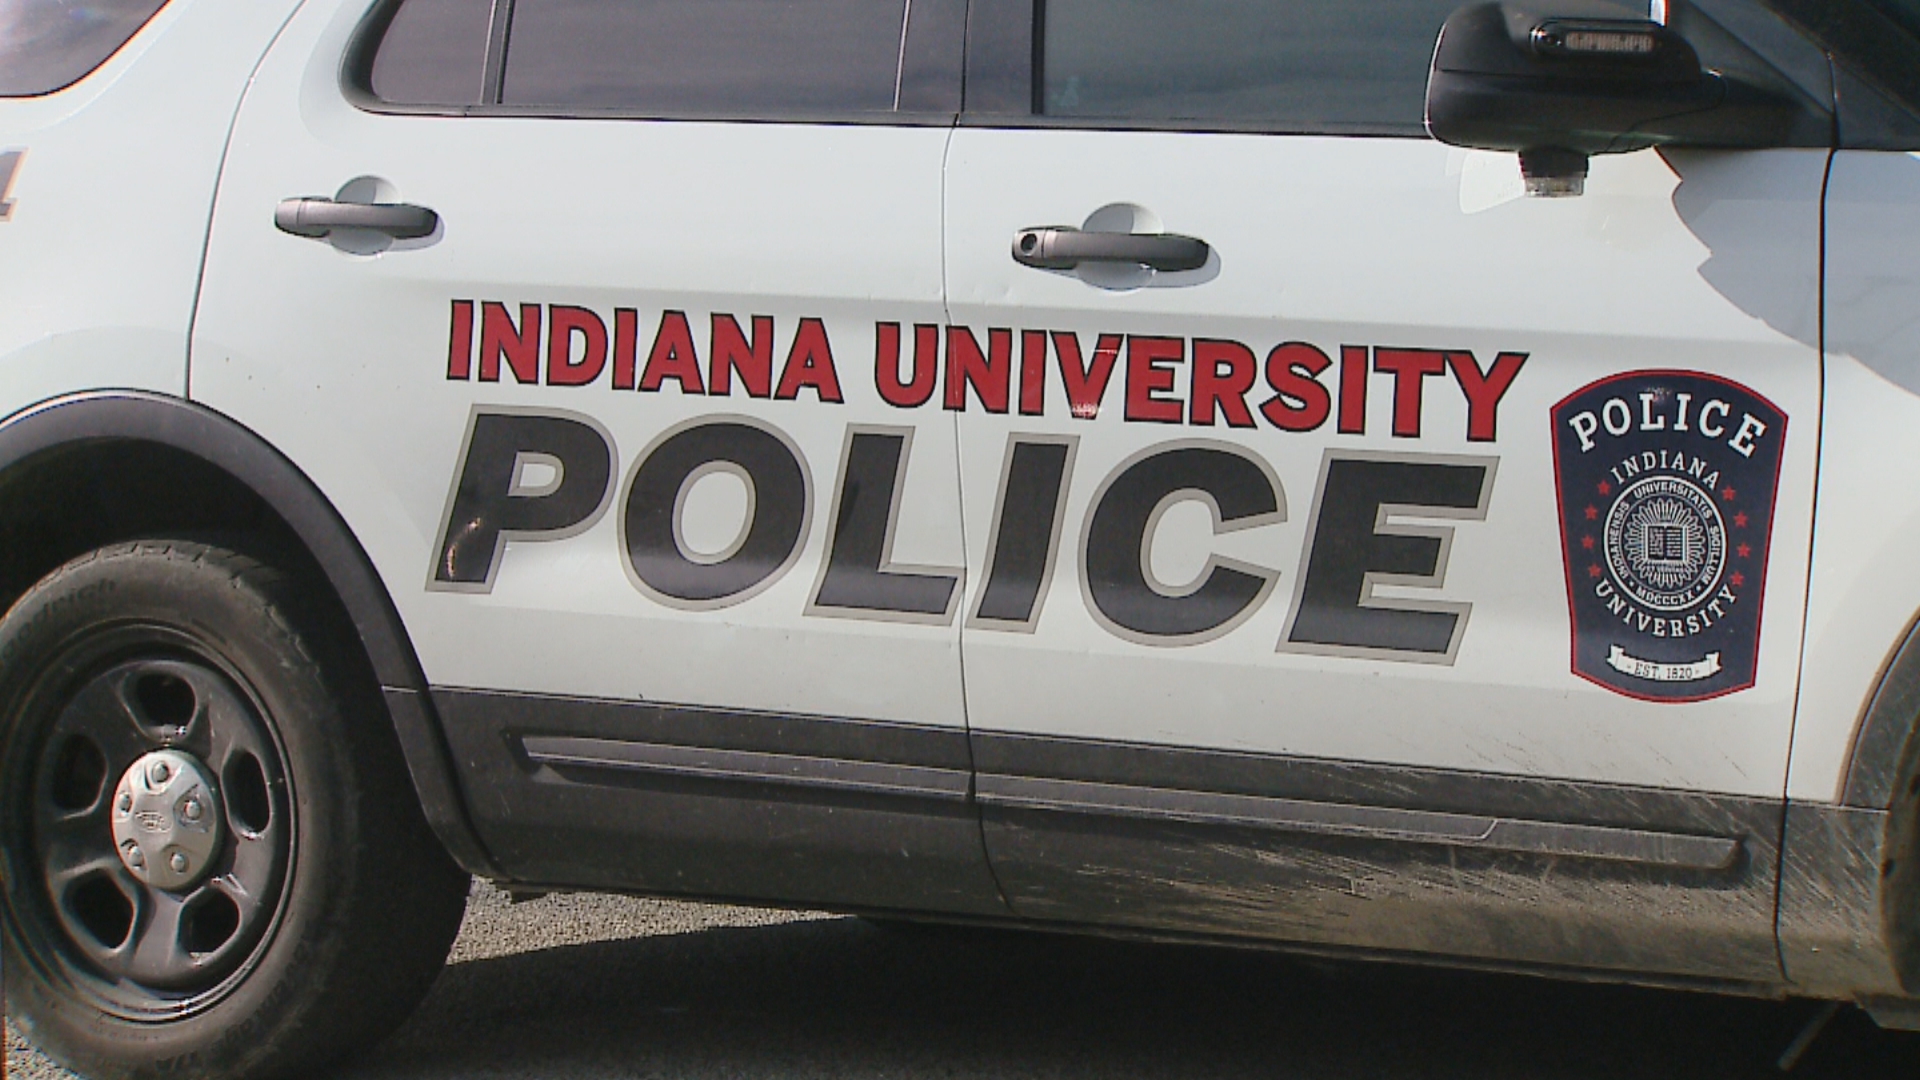 IUPD officers now required to undergo bystander training